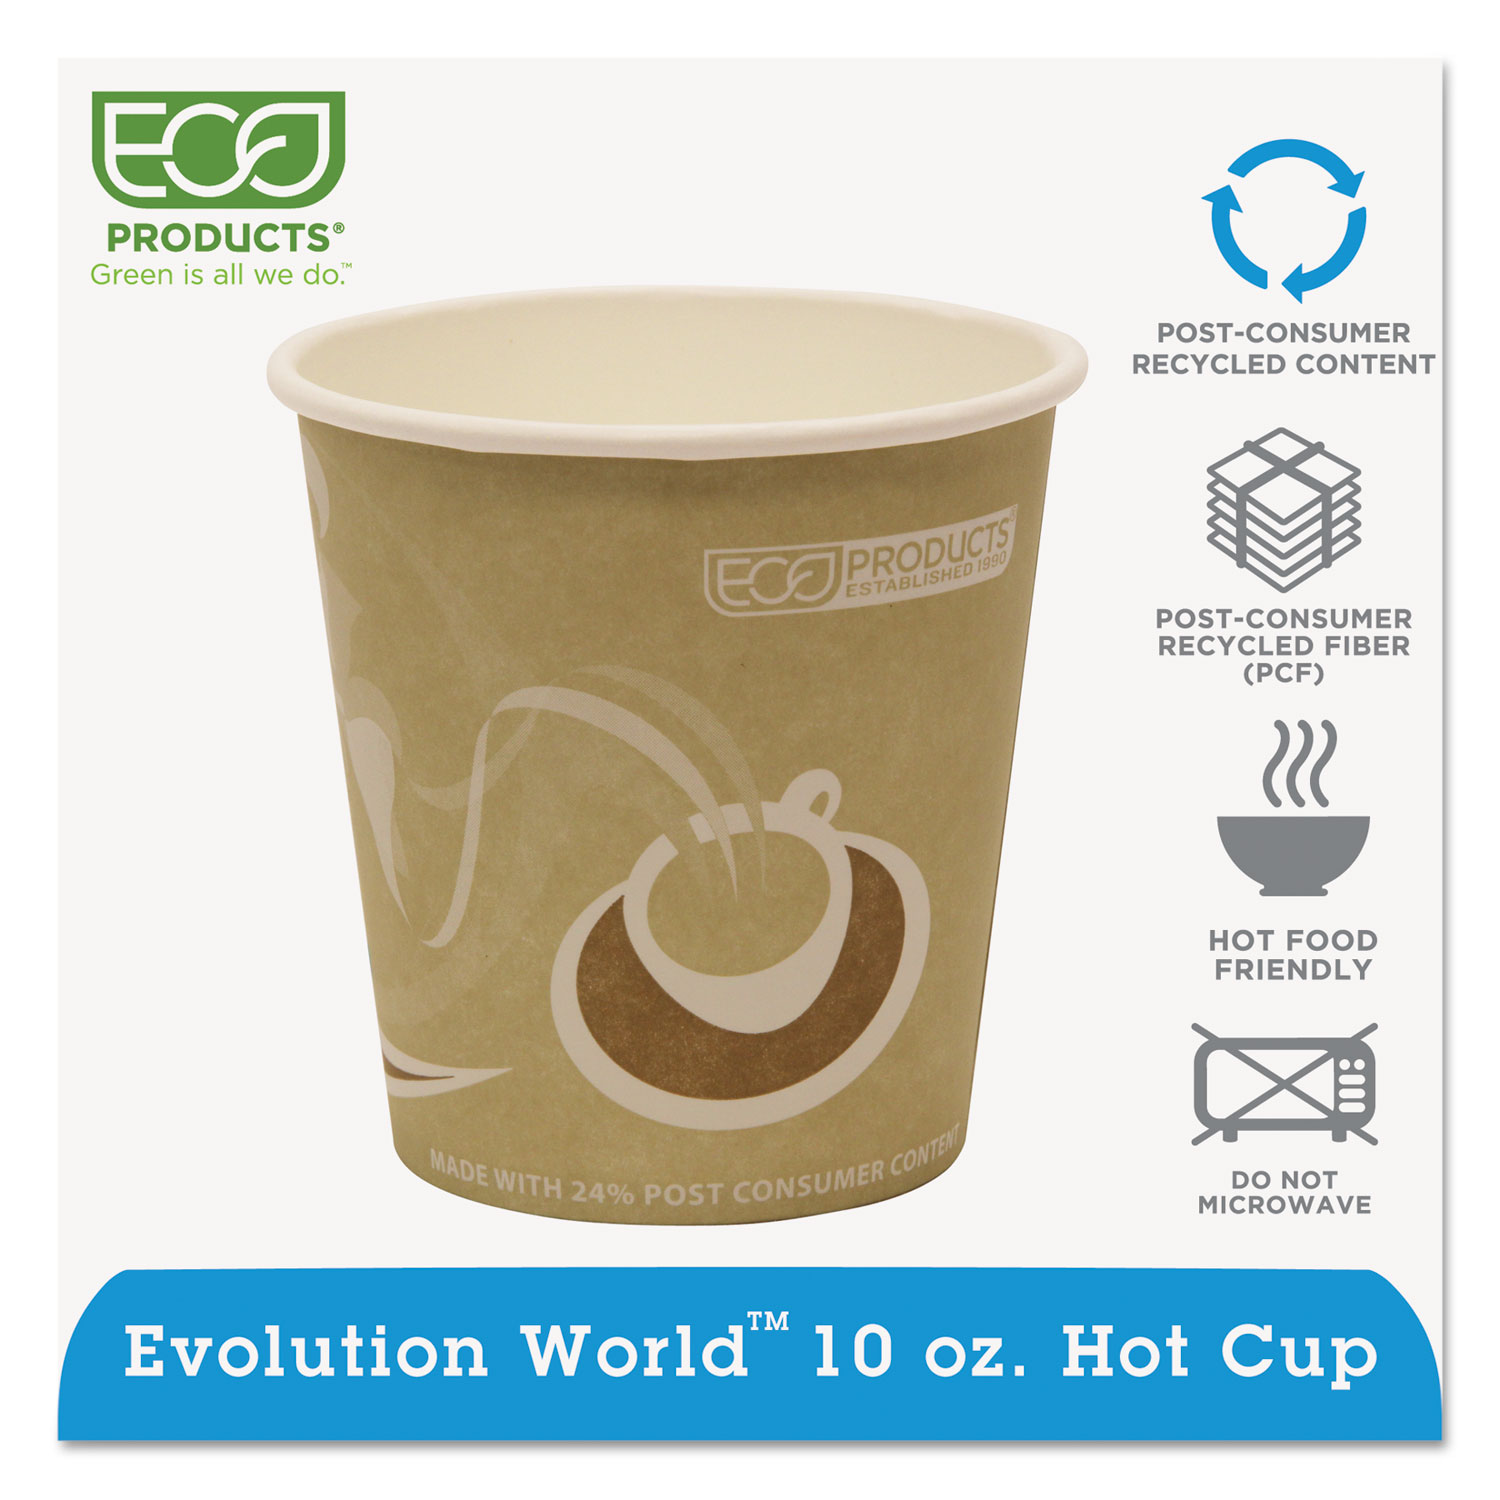  Eco-Products EP-BRHC10-EW Evolution World 24% Recycled Content Hot Cups - 10oz., 50/PK, 20 PK/CT (ECOEPBRHC10EW) 